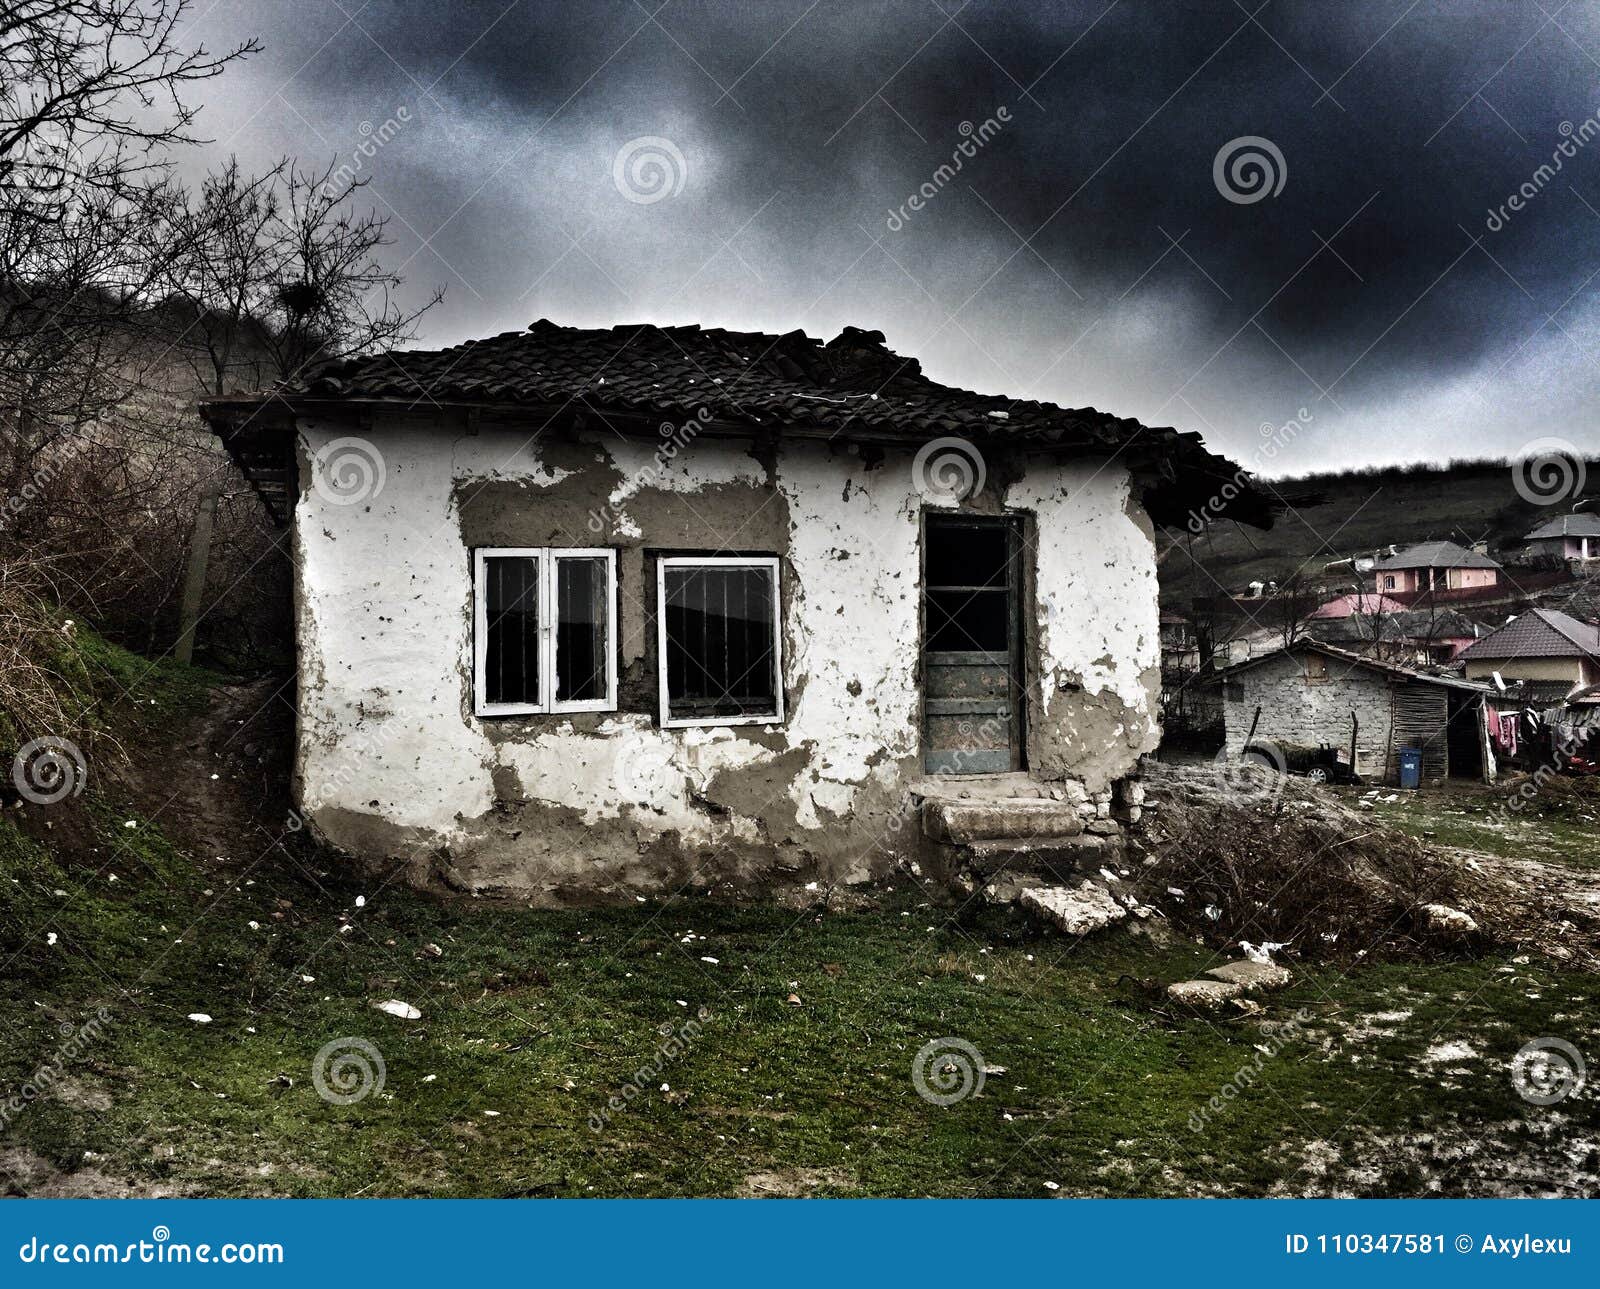 Old Haunted House Ruin Scary Stock Image - Image of ghost, evil: 110347581